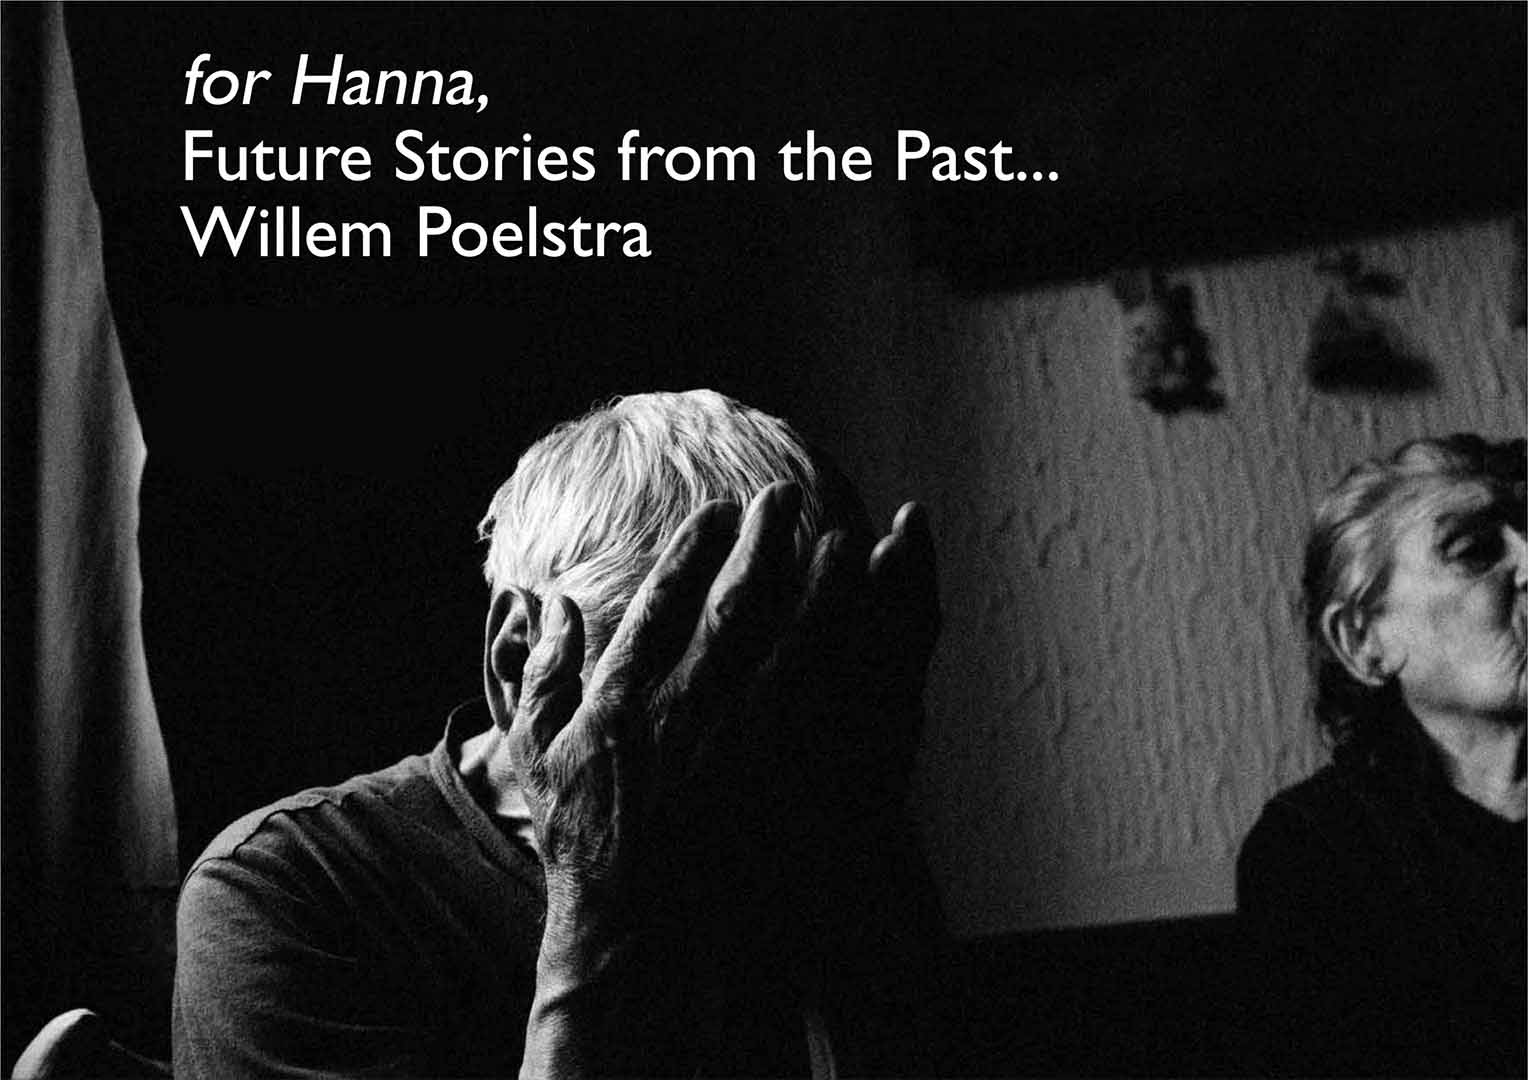 for Hanna, Future Stories from the Past book 1